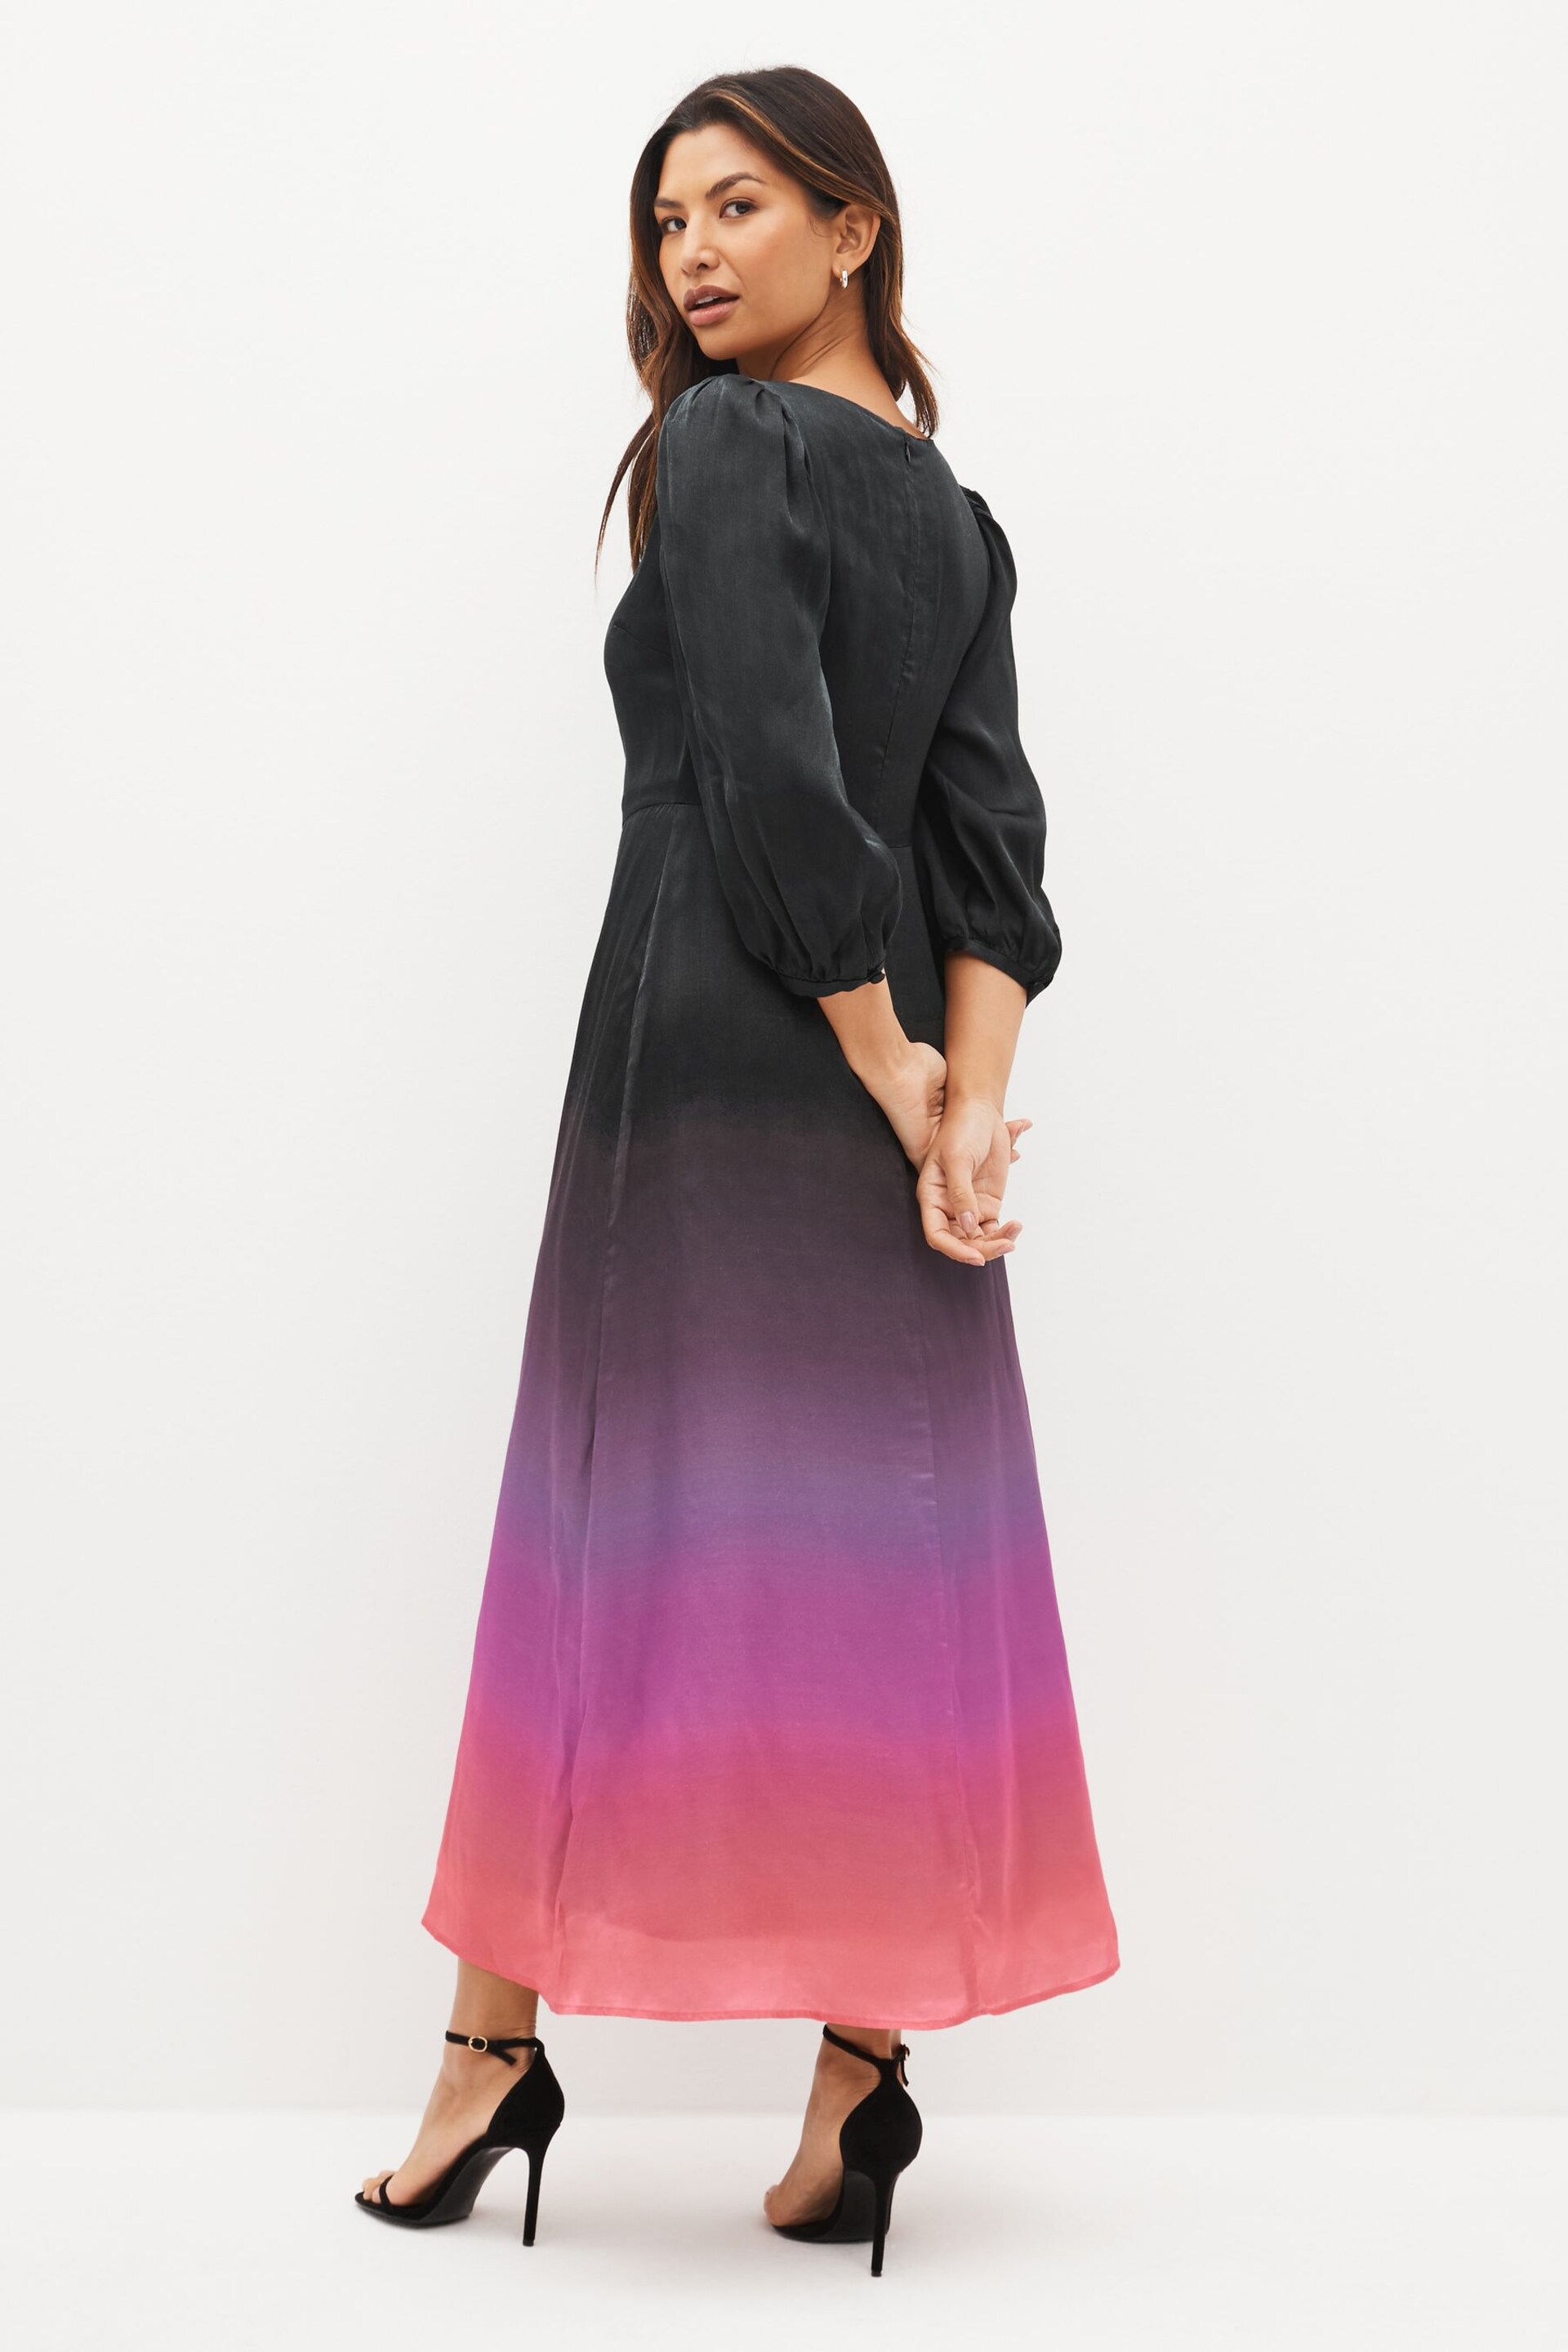 Olivia Rubin Lara Ombre Black Midi Dress with Puff Sleeve and a Fitted Waist - Image 2 of 4